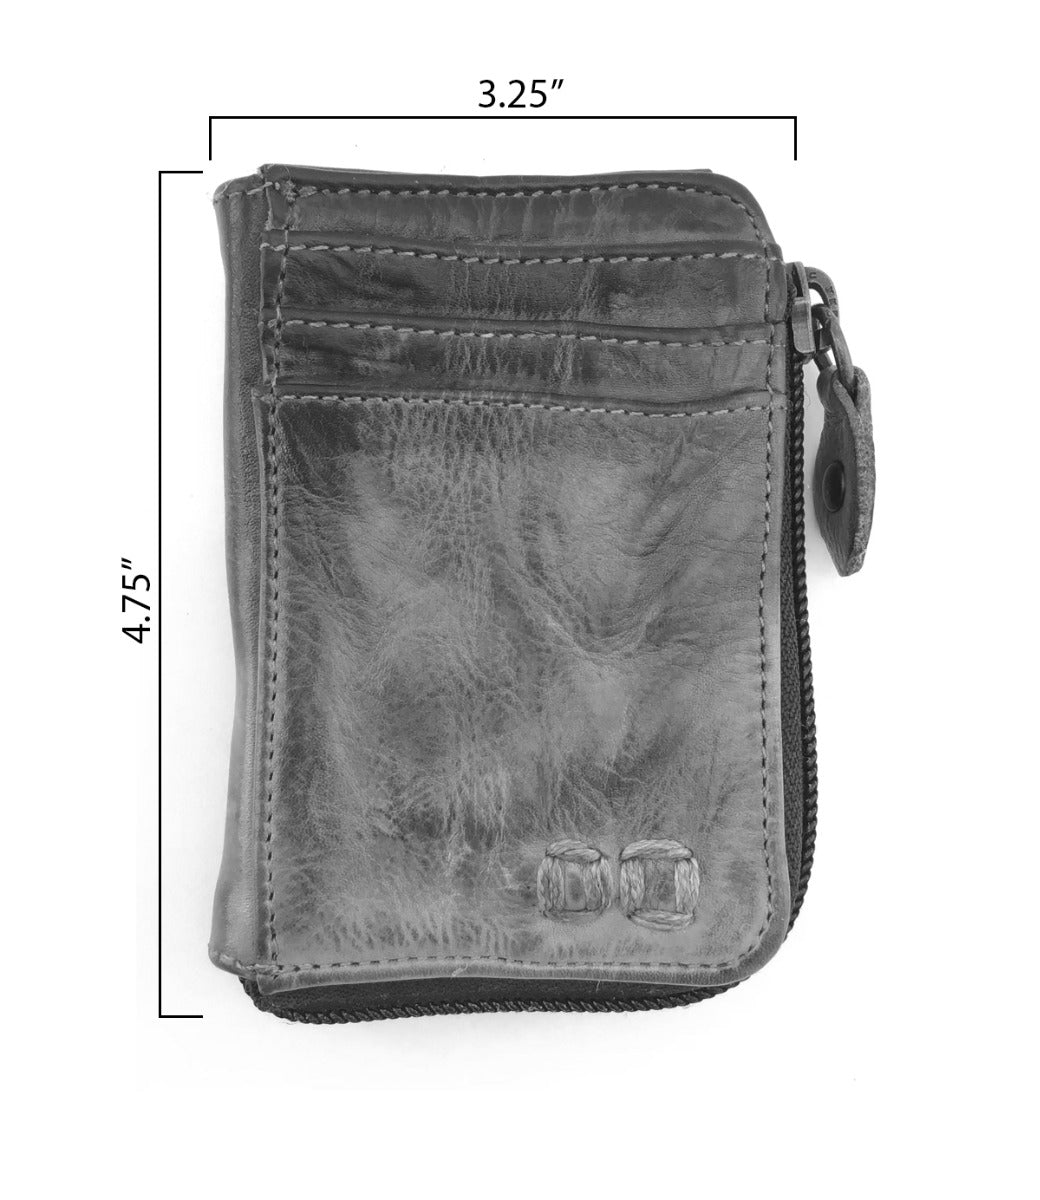 A Bed Stu "Carrie" black leather wallet with a zipper and measurements.